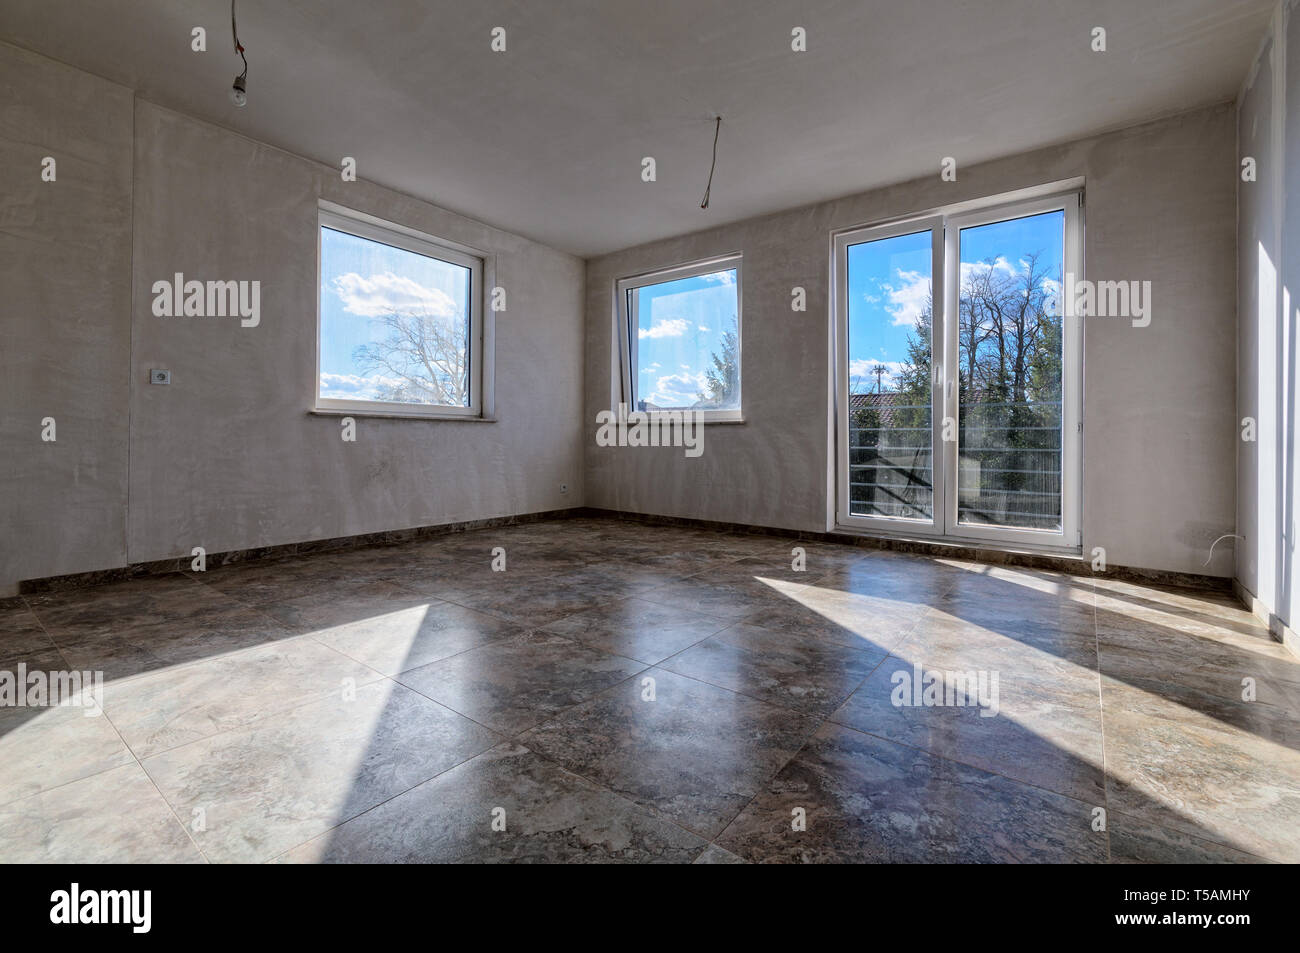 The interior of a new apartment. HDR - high dynamic range Stock Photo